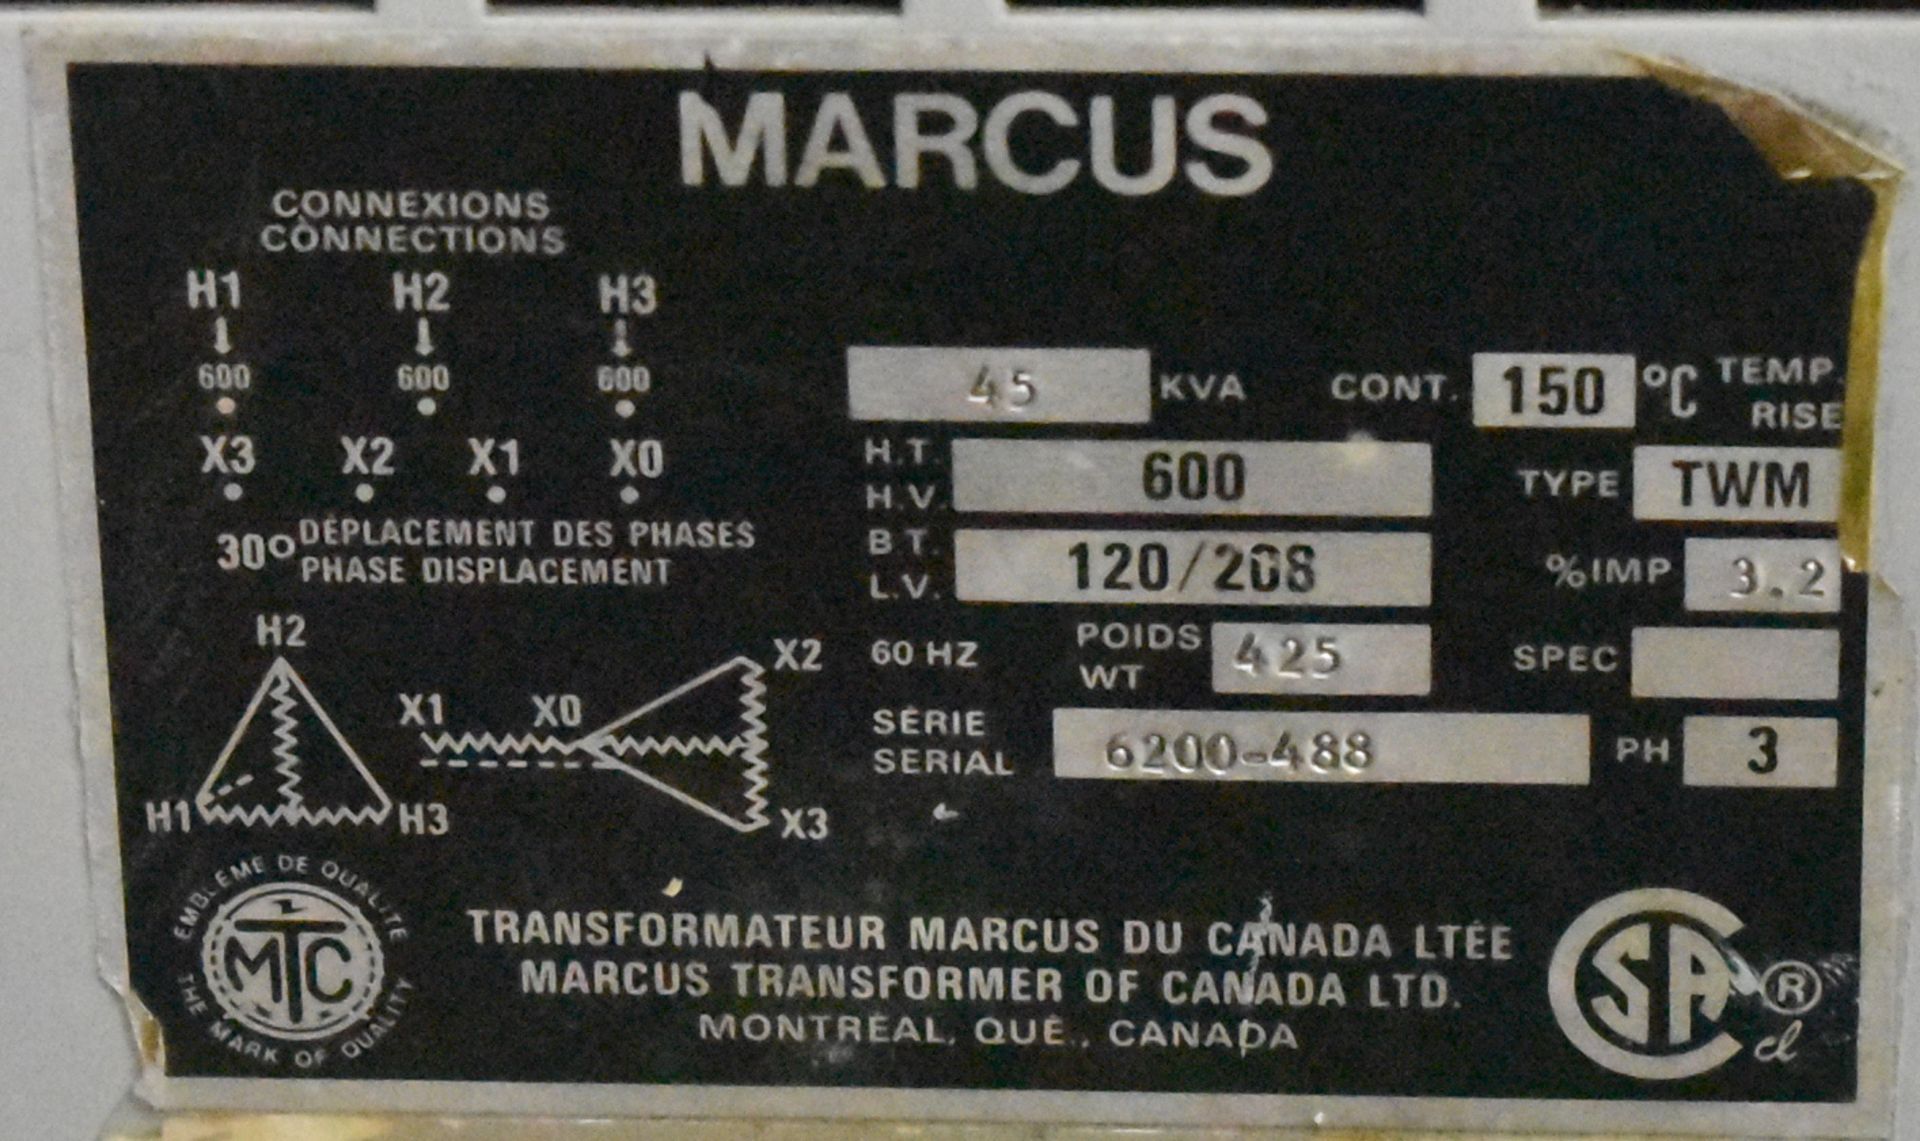 MARCUS TRANSFORMER WITH 45 KVA, 120/208LV, 600HV, 3 PH (CI) (LOCATED IN KITCHENER, ON) - Image 2 of 2